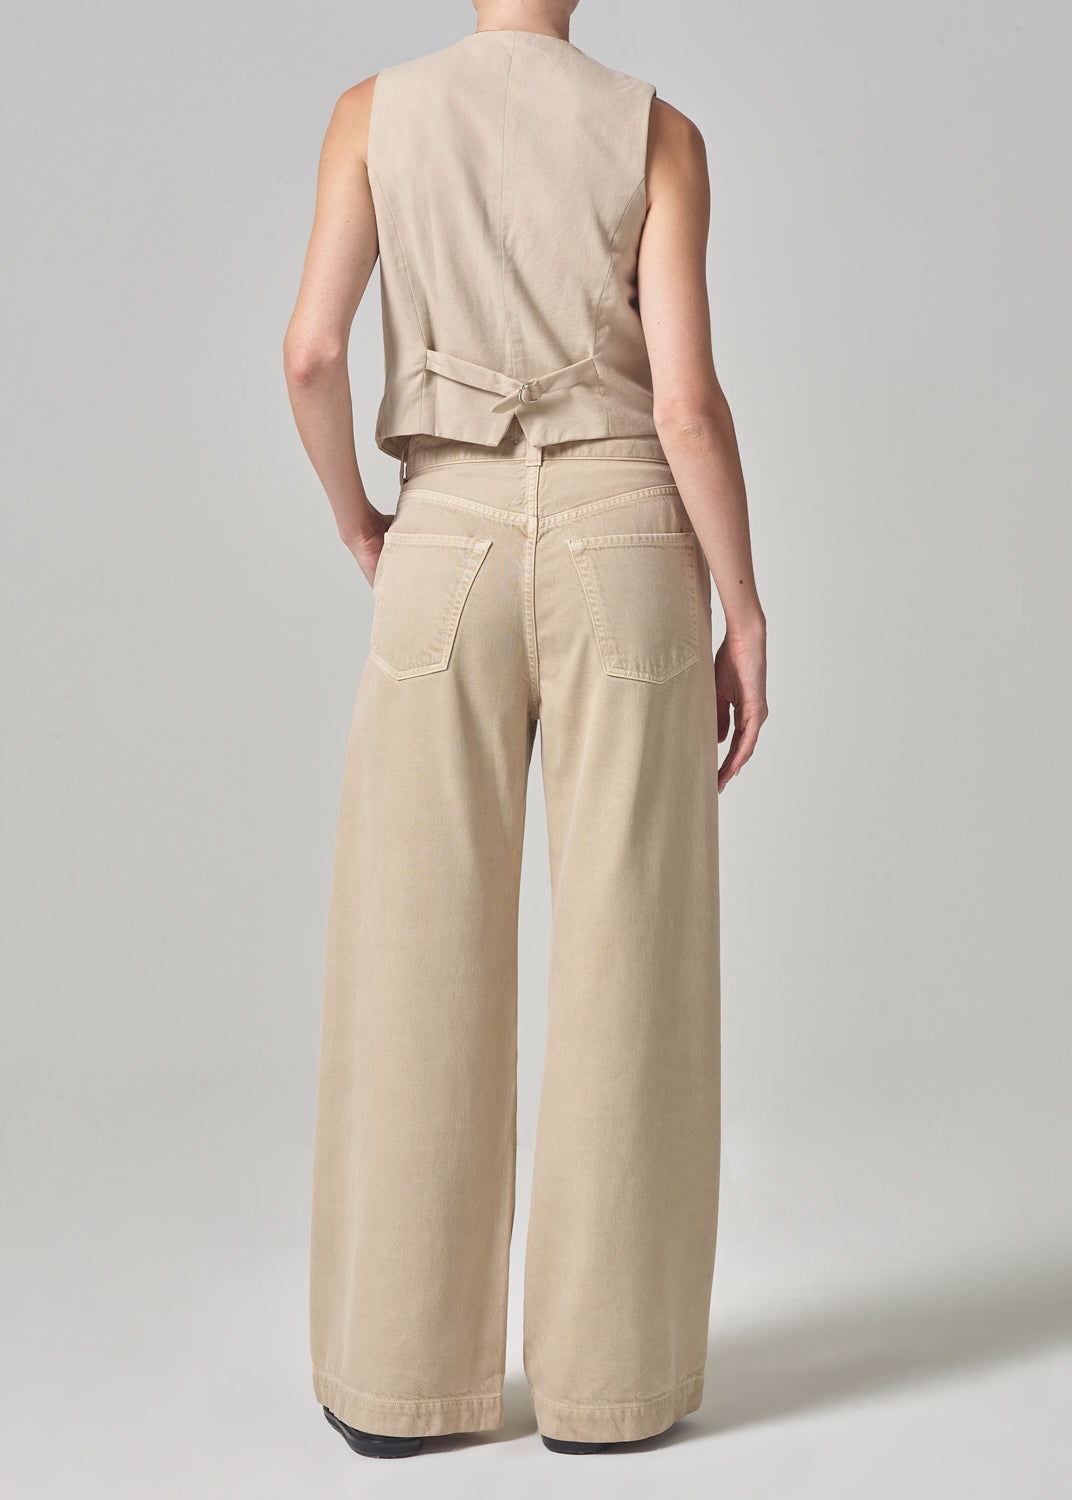 Citizens Of Humanity Beverly Trouser